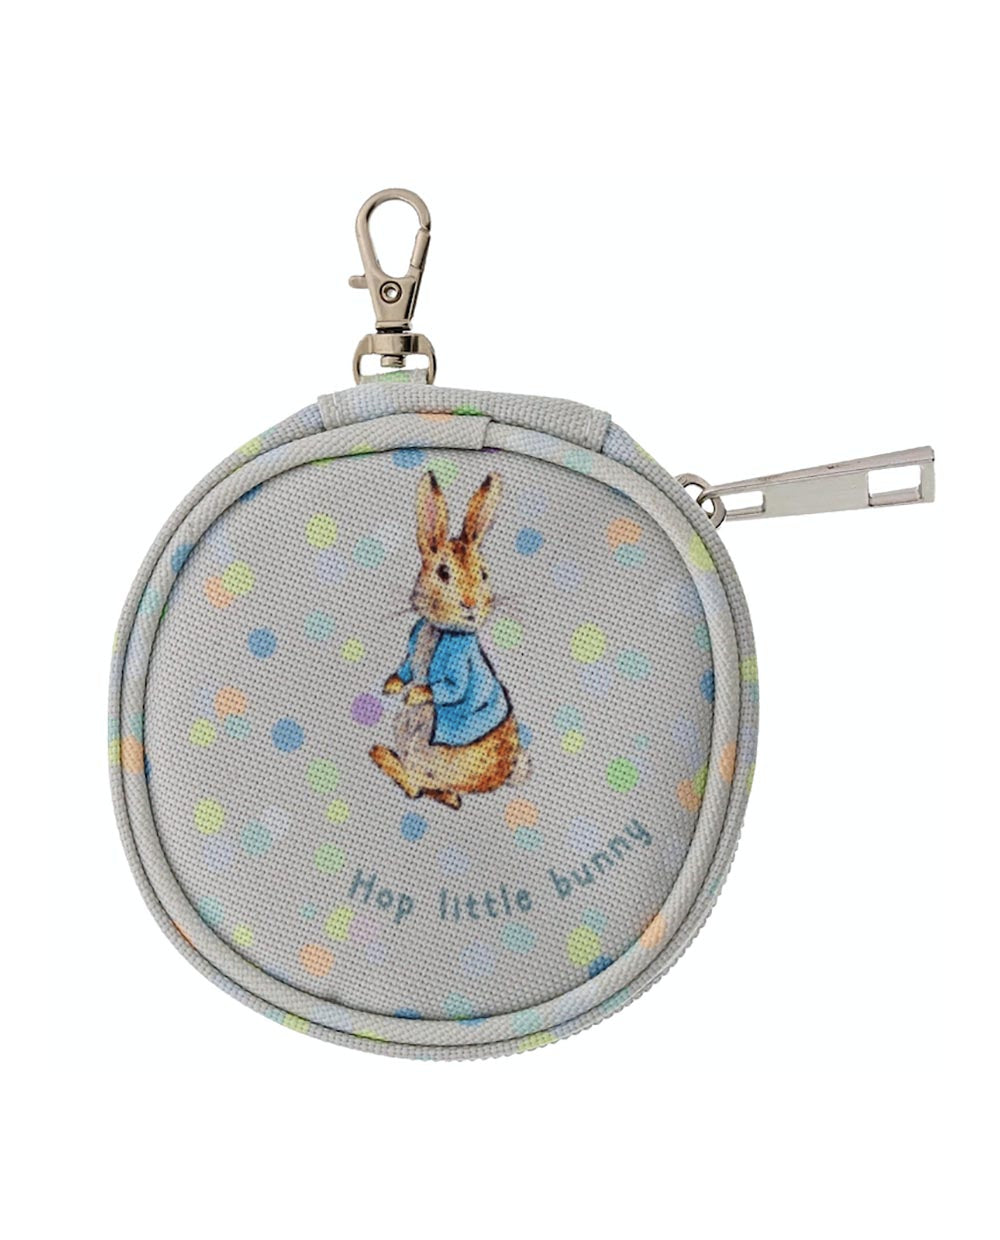 Peter Rabbit Baby Collection Soother Holder